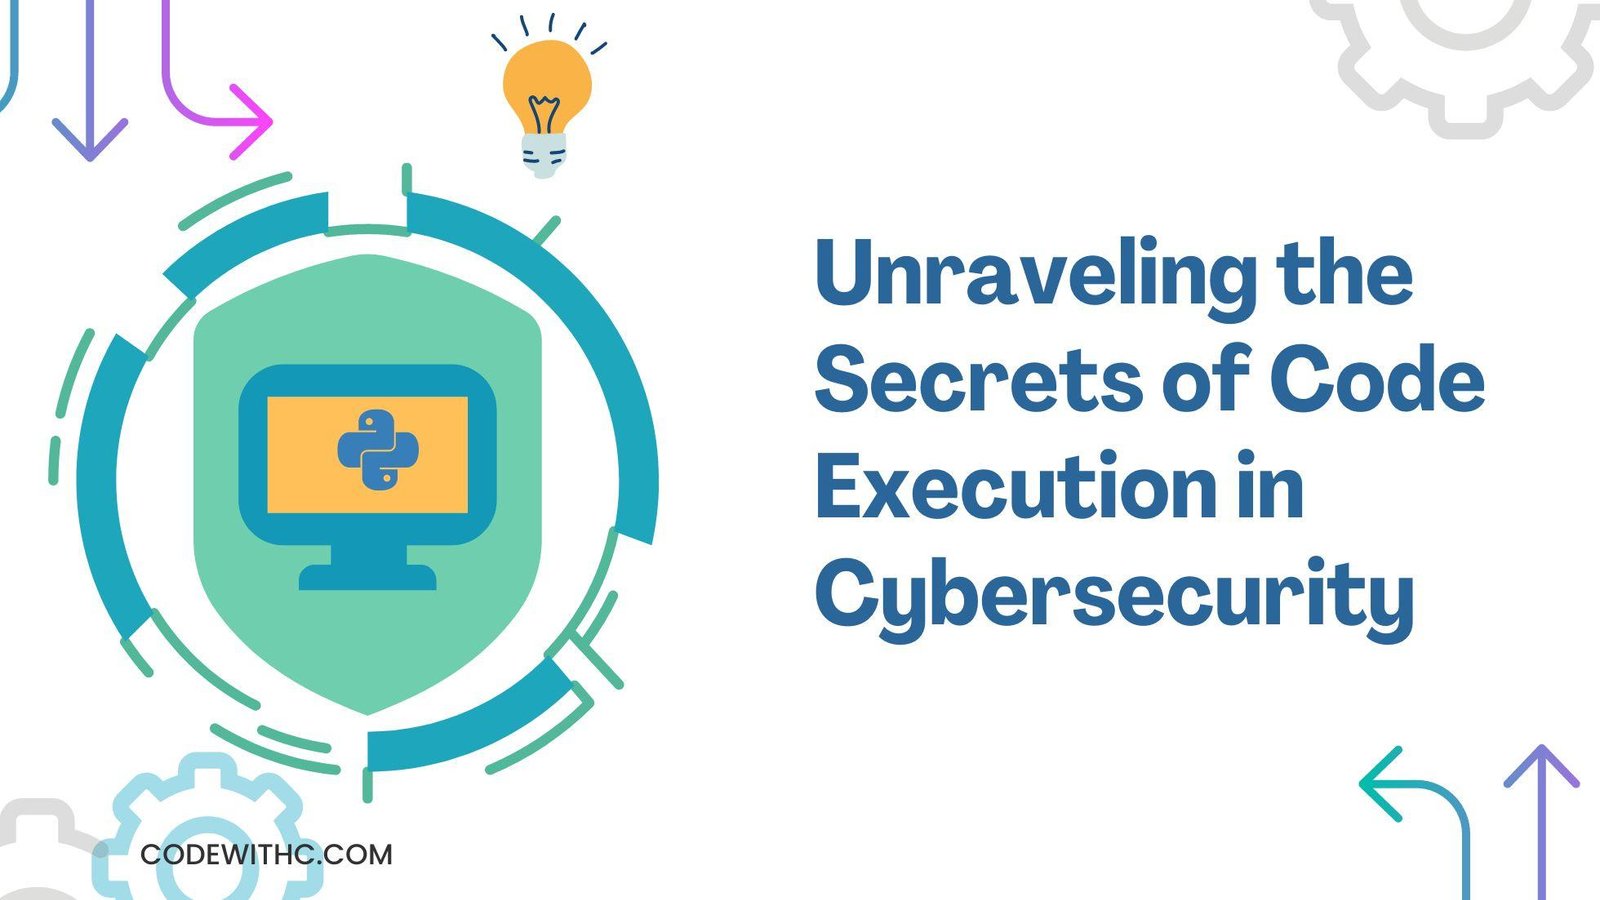 Unraveling the Secrets of Code Execution in Cybersecurity